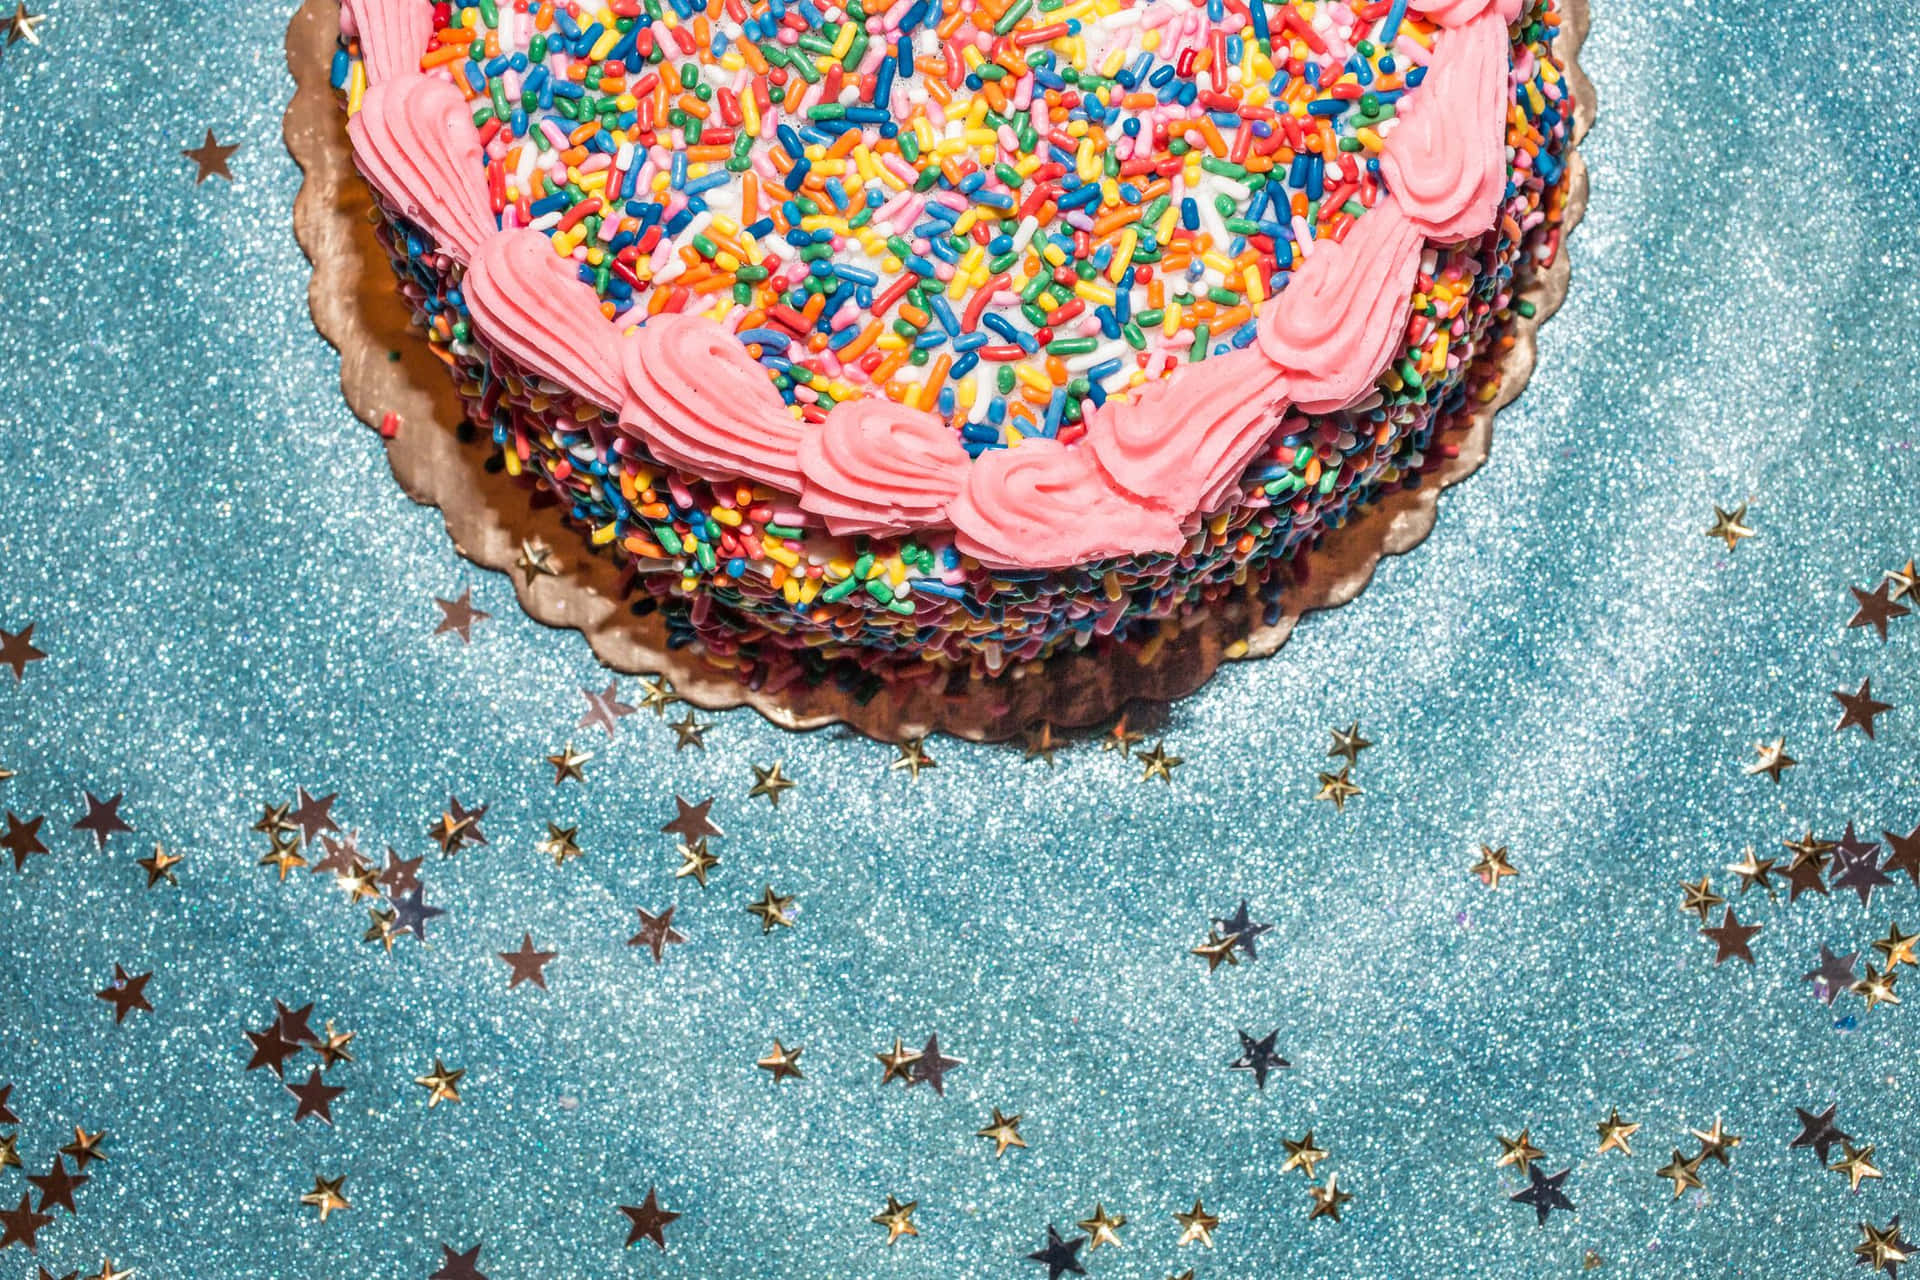 Delicious and colorful birthday cake